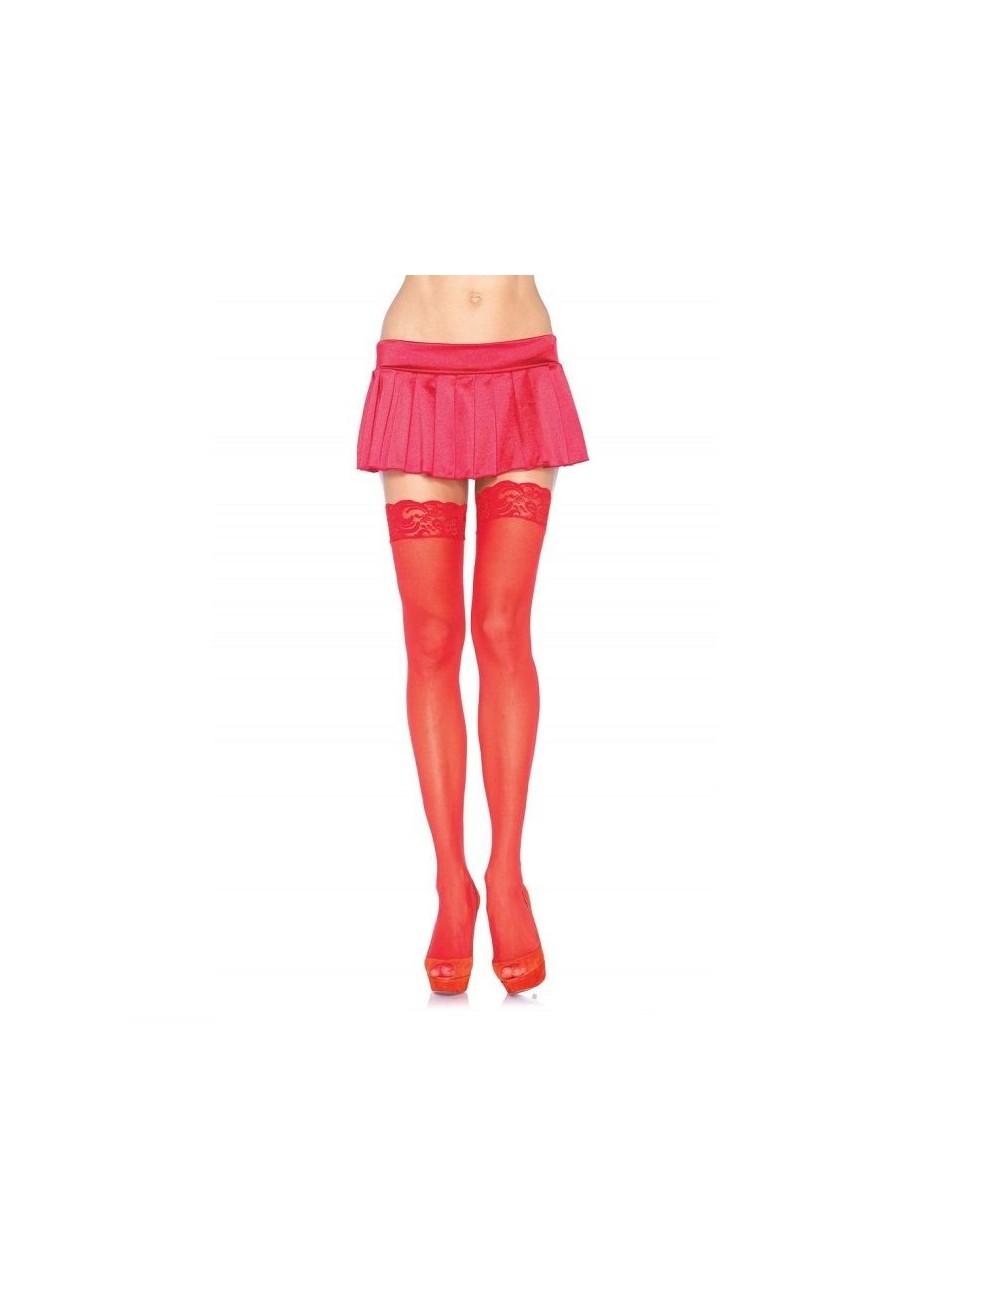 BEIN AVENUE SHEER THIGH HIGHS ROT